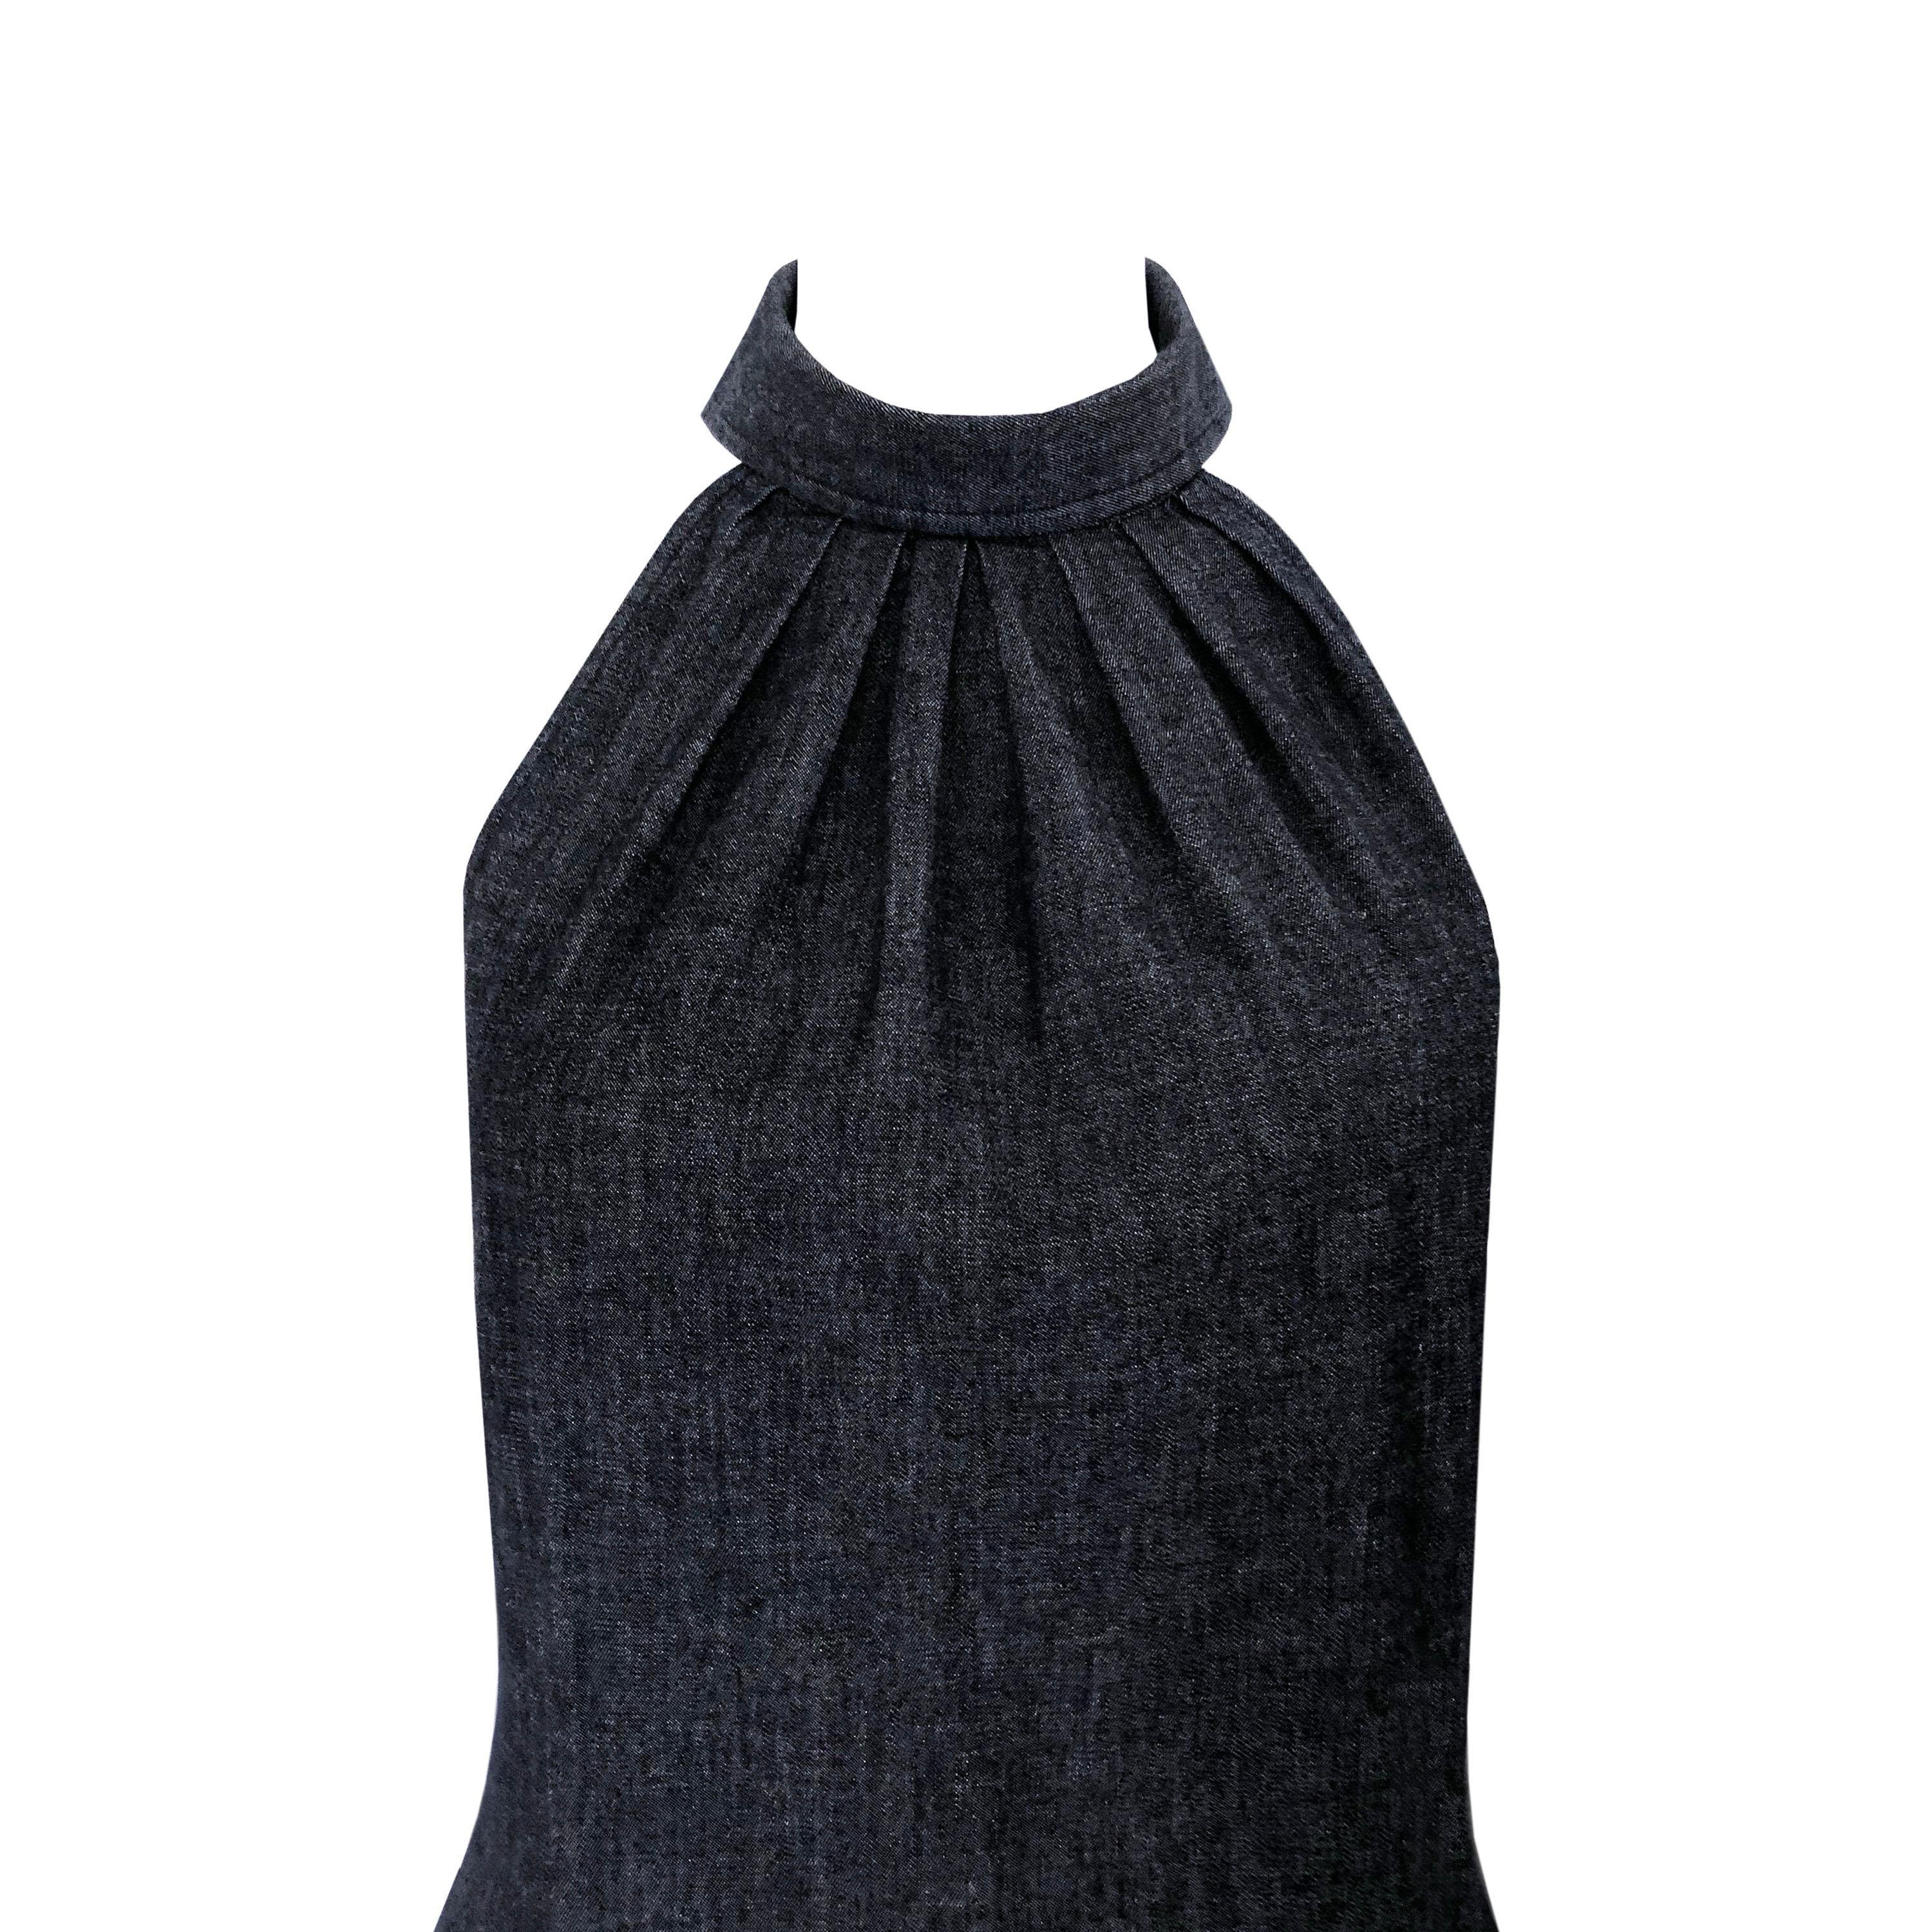 Moschino Jeans Dress - Denim - Halter Neck Collar + Backless Strap Detail In Excellent Condition For Sale In KENT, GB